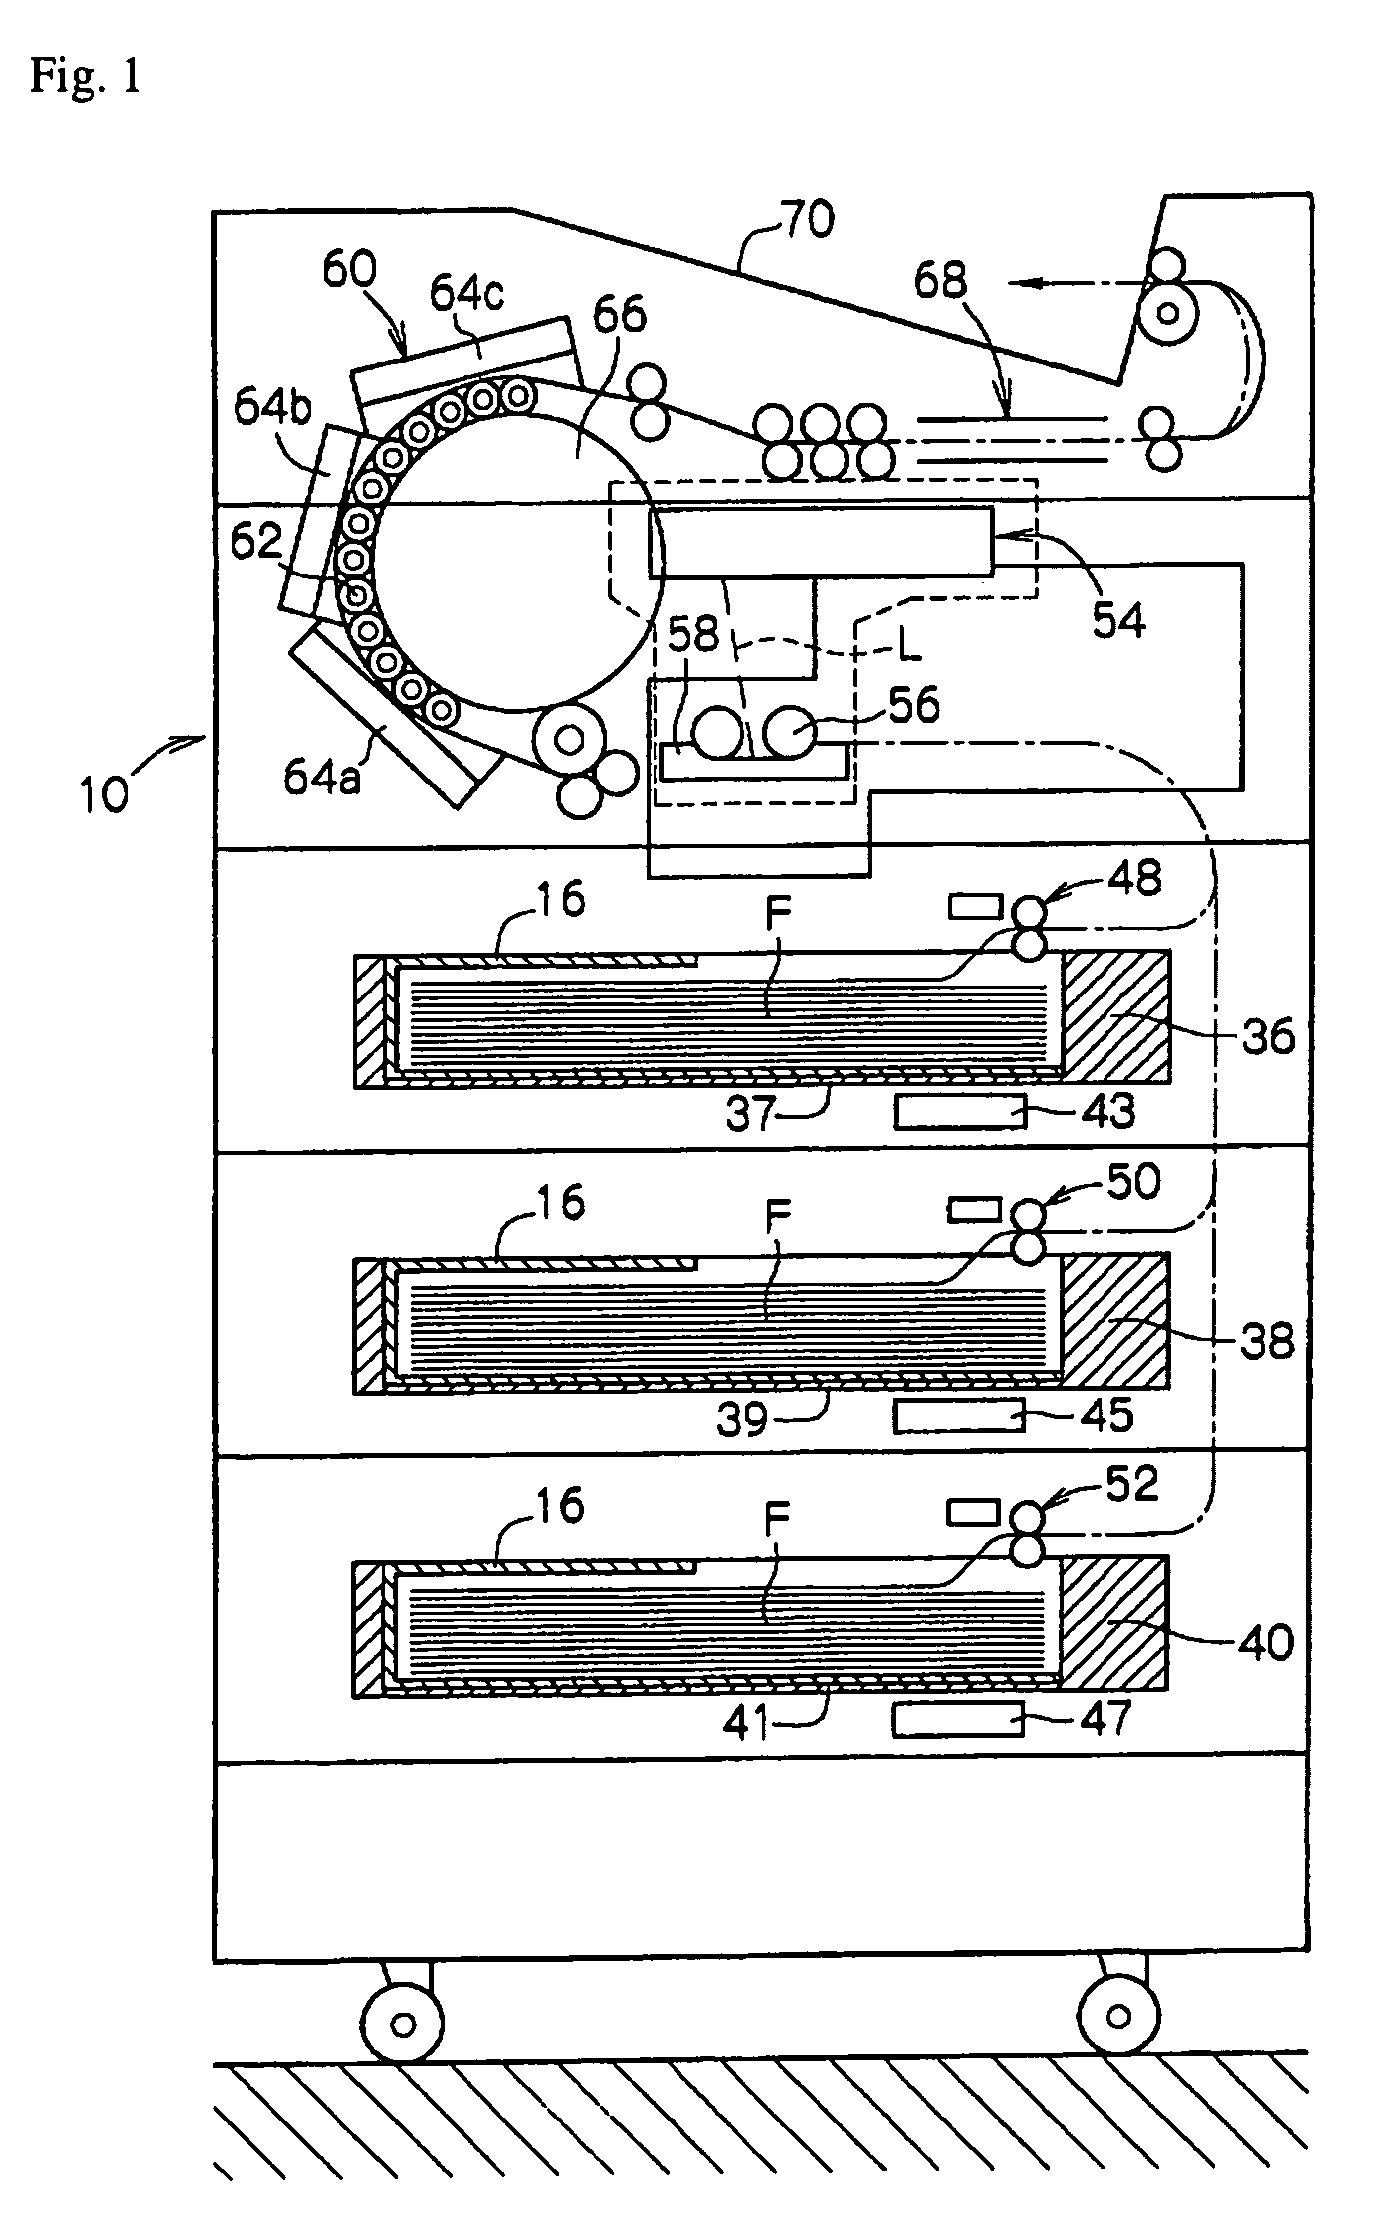 Photothermographic material and method of forming images